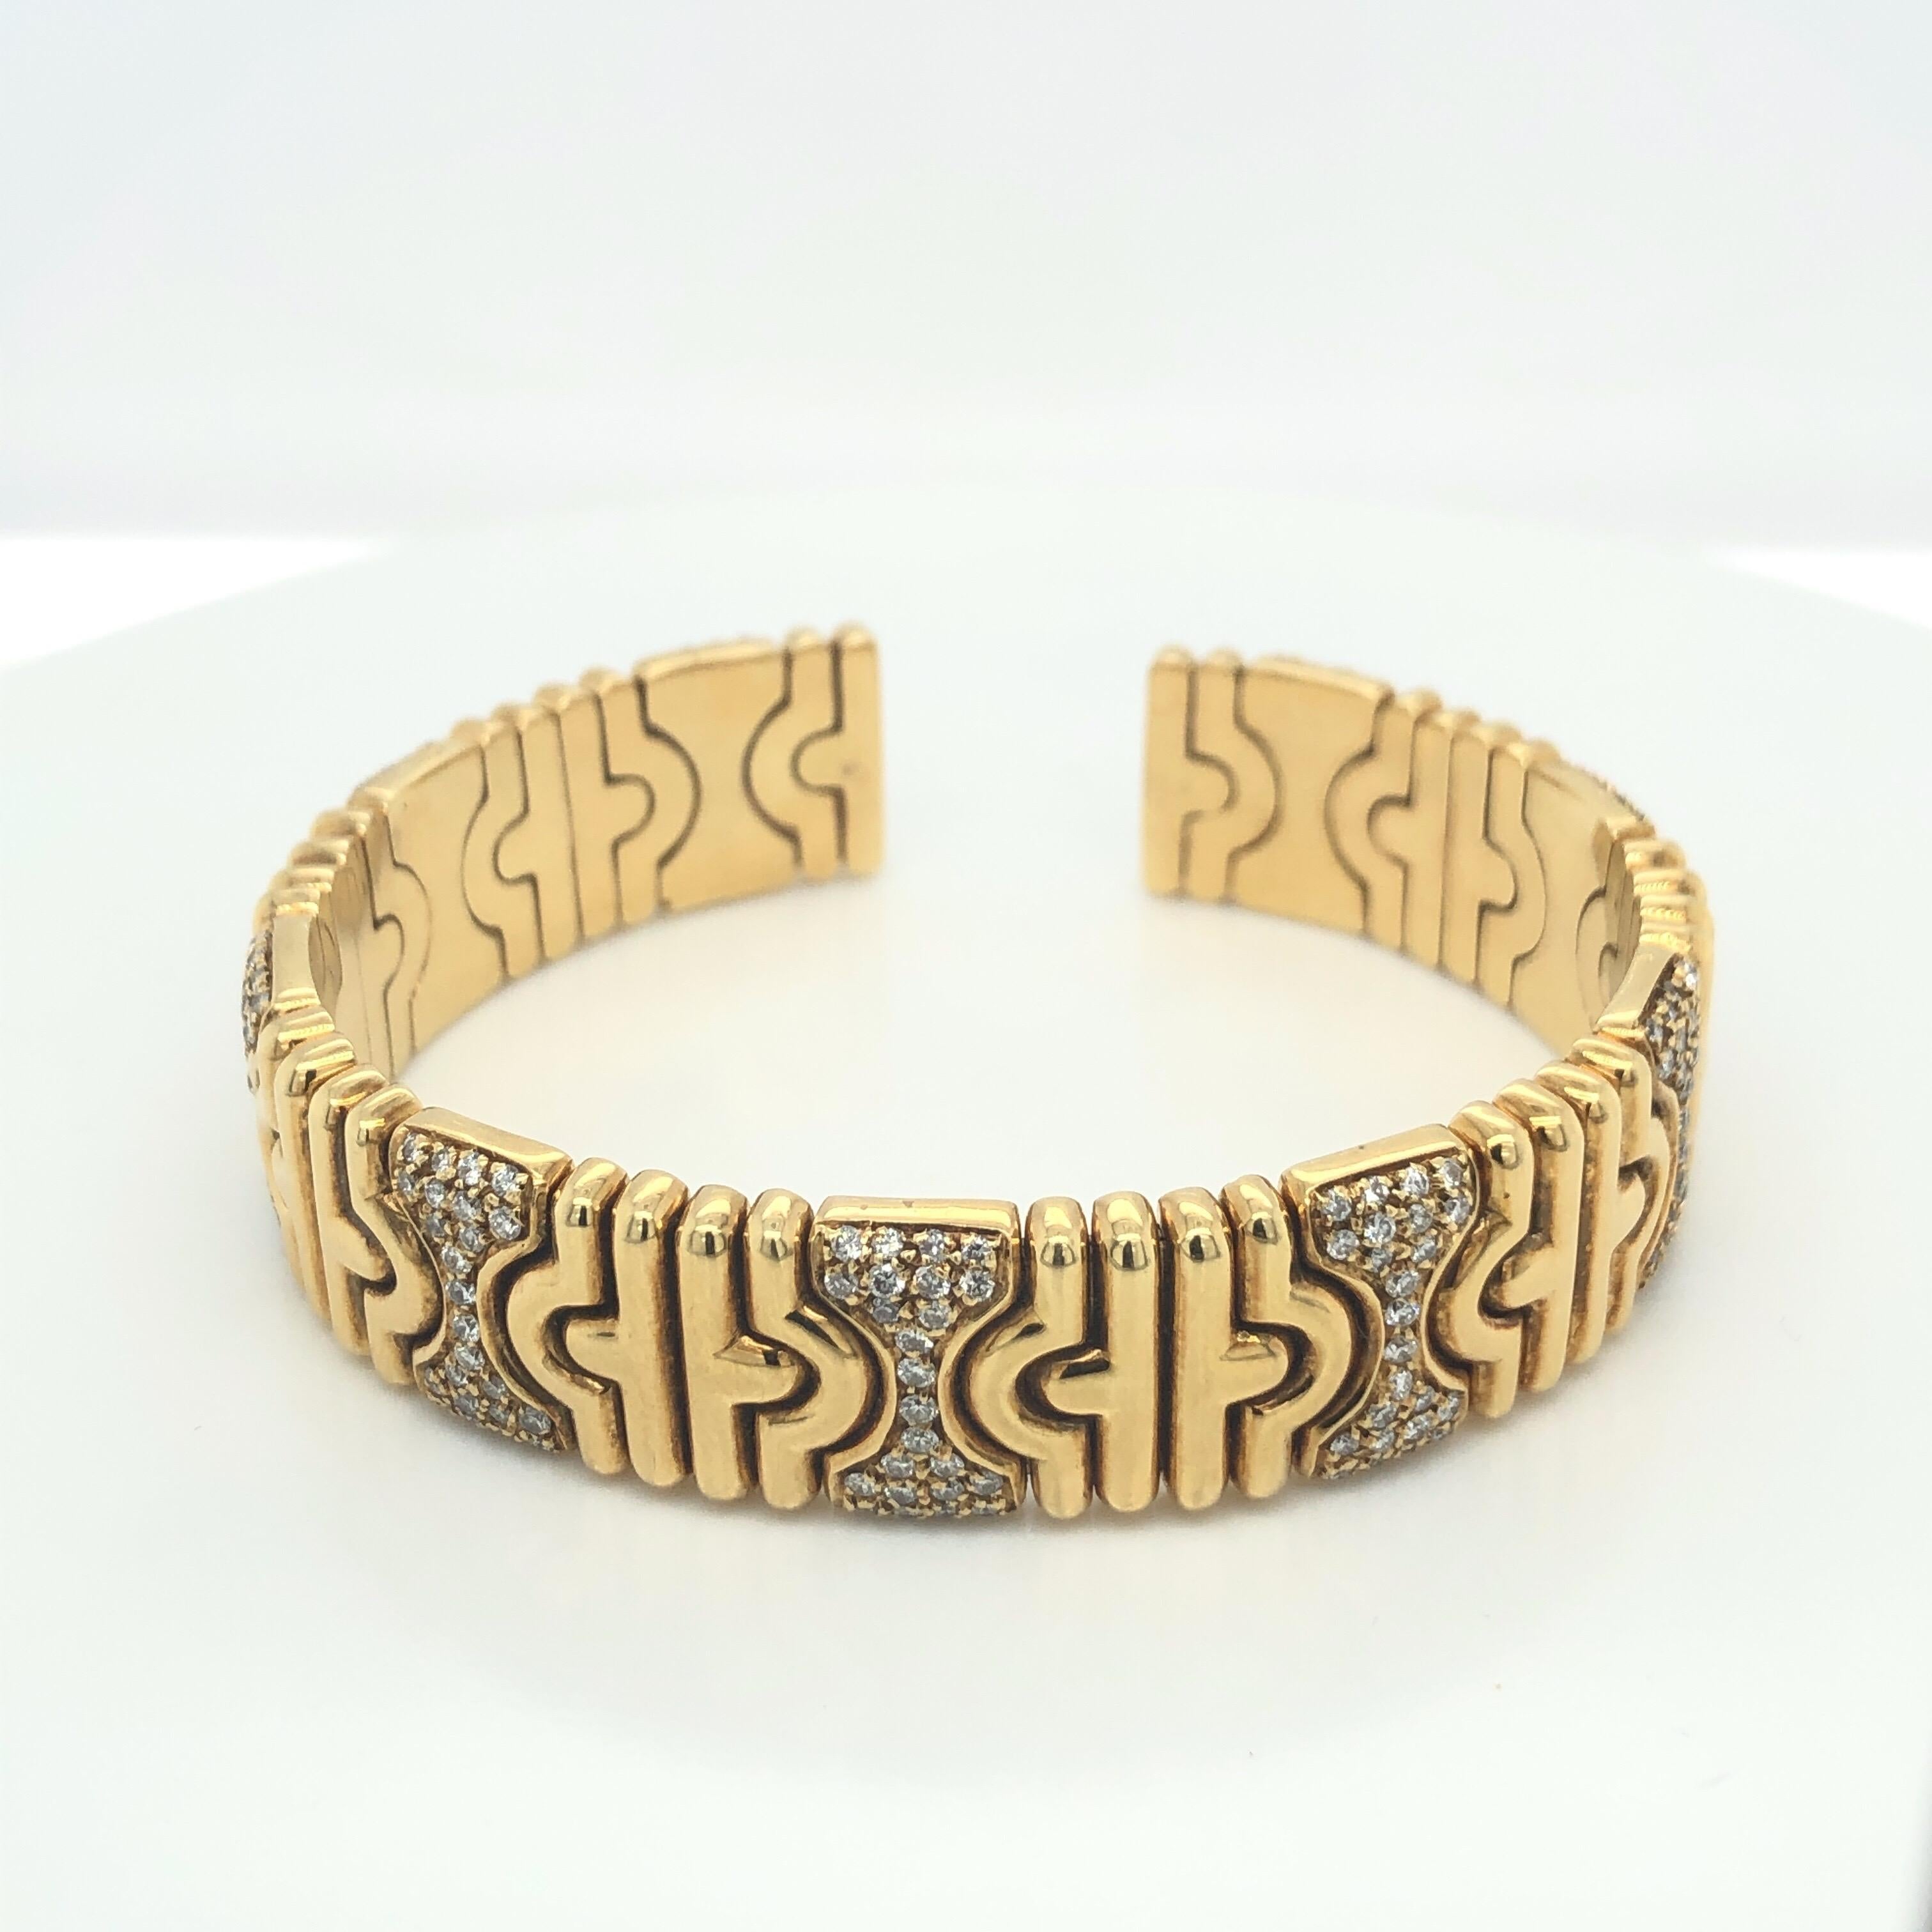 18k Yellow Gold Flexible Cuff Bracelet from Chatila with Diamonds Set in Hourglass Formation. Stamped 750.